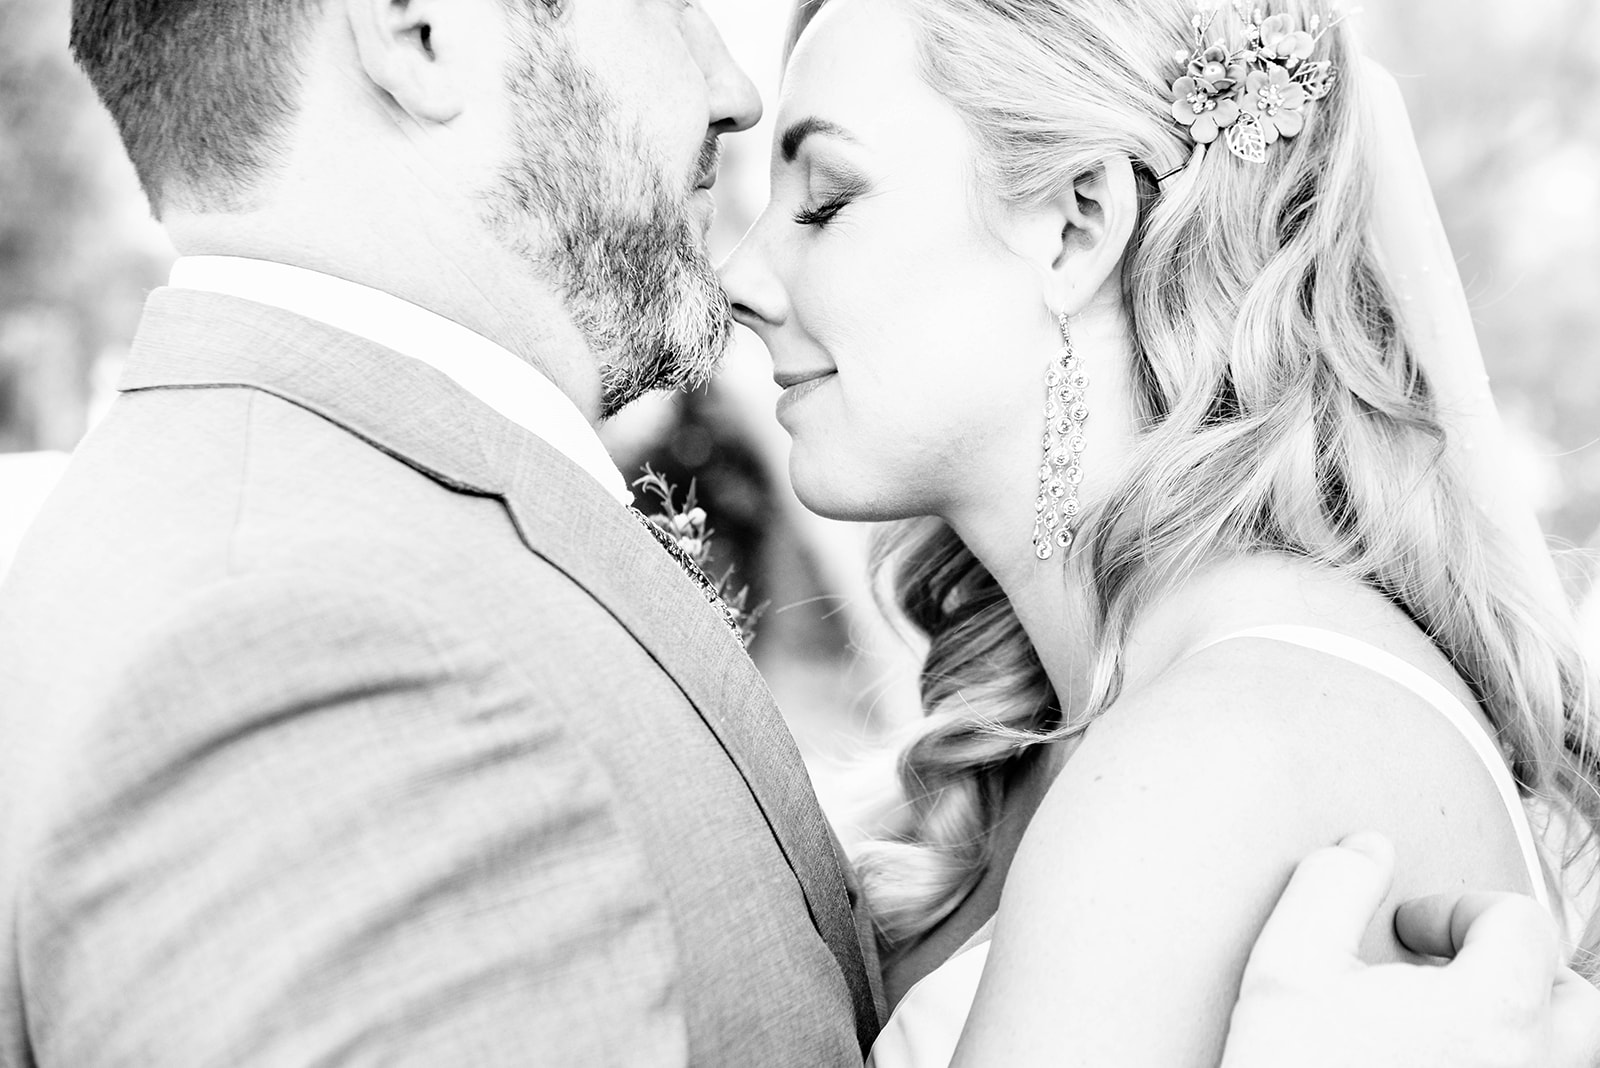 Black and white photo taken at a private residence in Paradise Valley, Arizona. Close up of a bride and groom in an intimate moment. Bride has her eyes closed, her nose is resting on the groom’s chin during the first look. His right hand is caressing her back. She has long diamond earrings on and a floral hair piece on the left side of her hair.